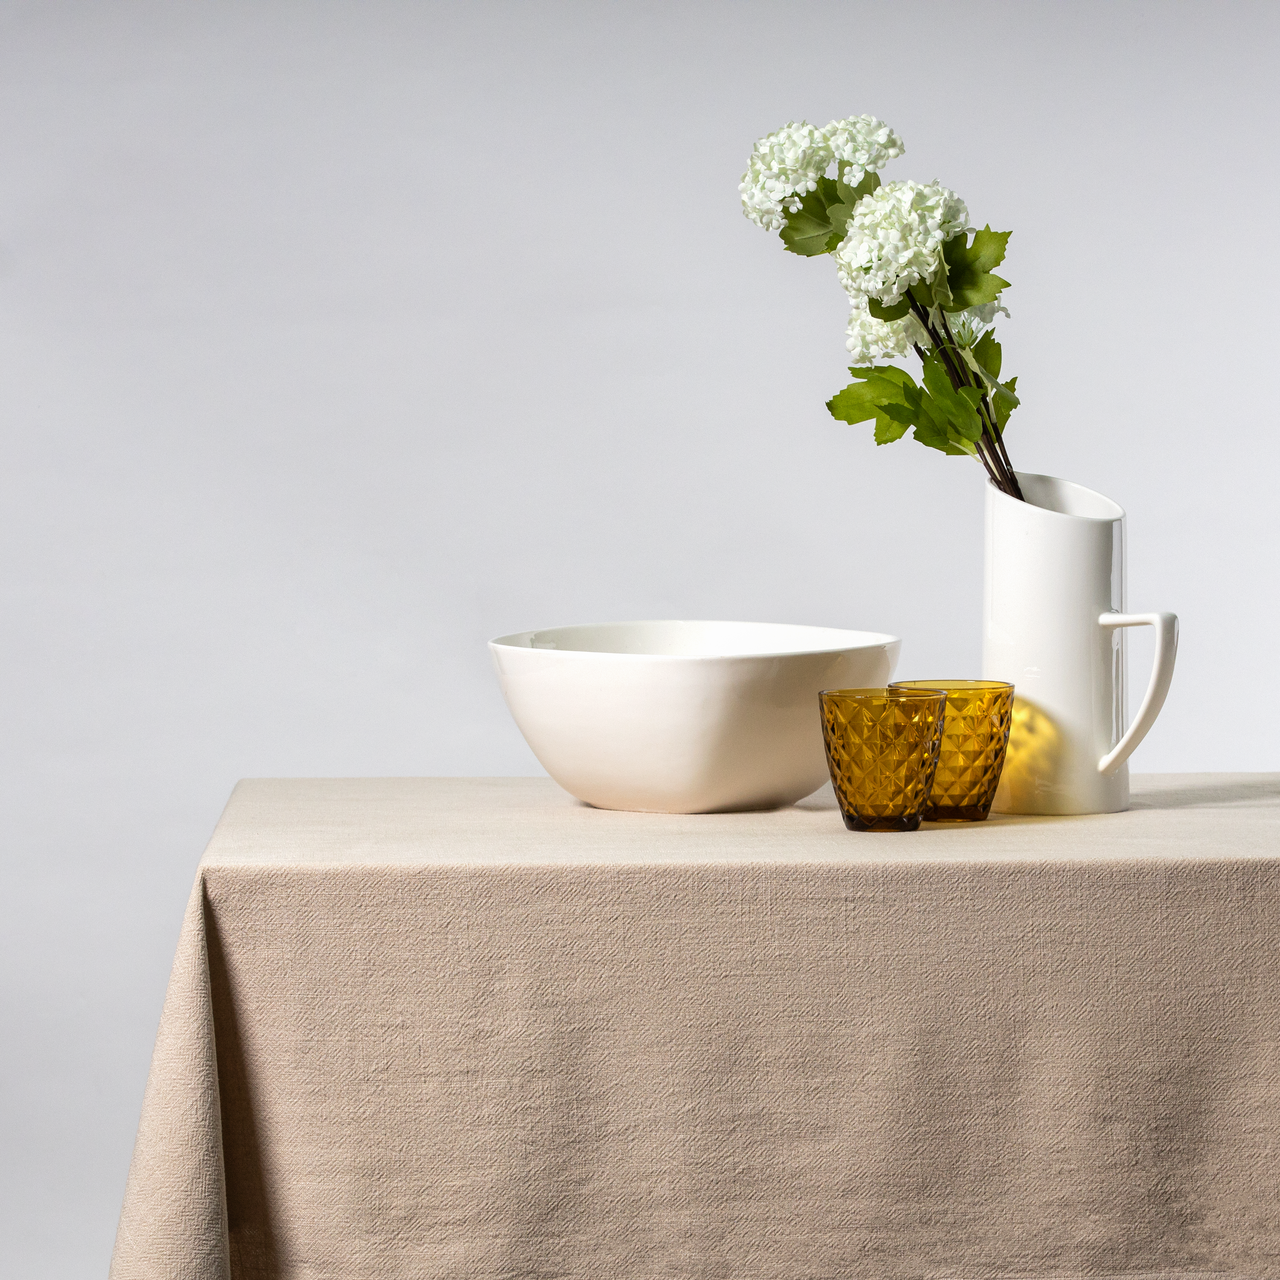 Celina Digby Luxury Stonewashed 100% Linen Tablecloth – Available in 7 Sizes STONE (beige) 250 x 128cm